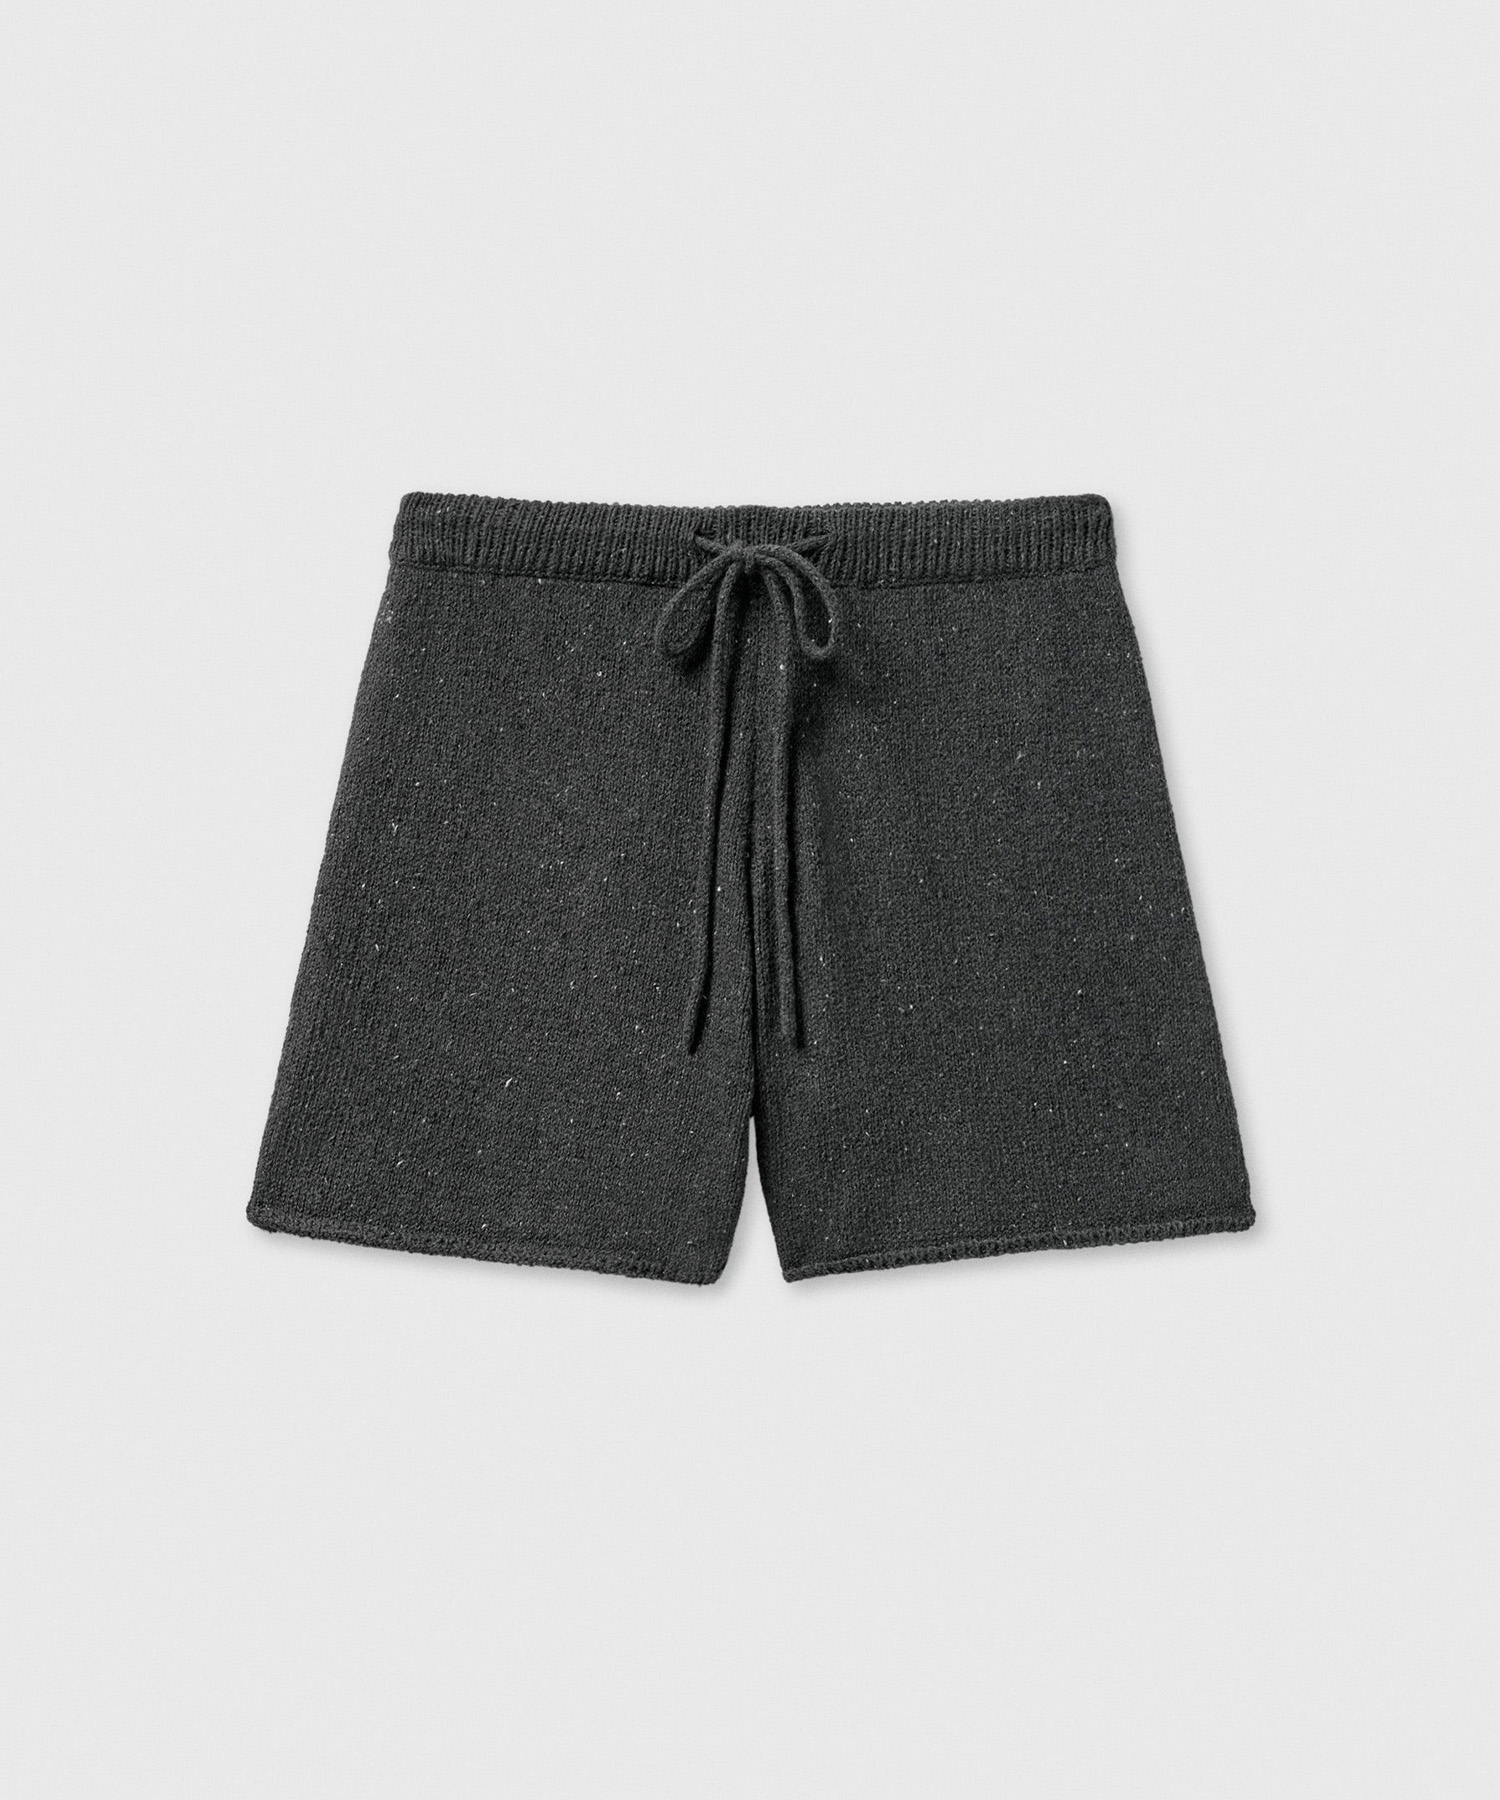 Heather Cotton Shorts (Charcoal)